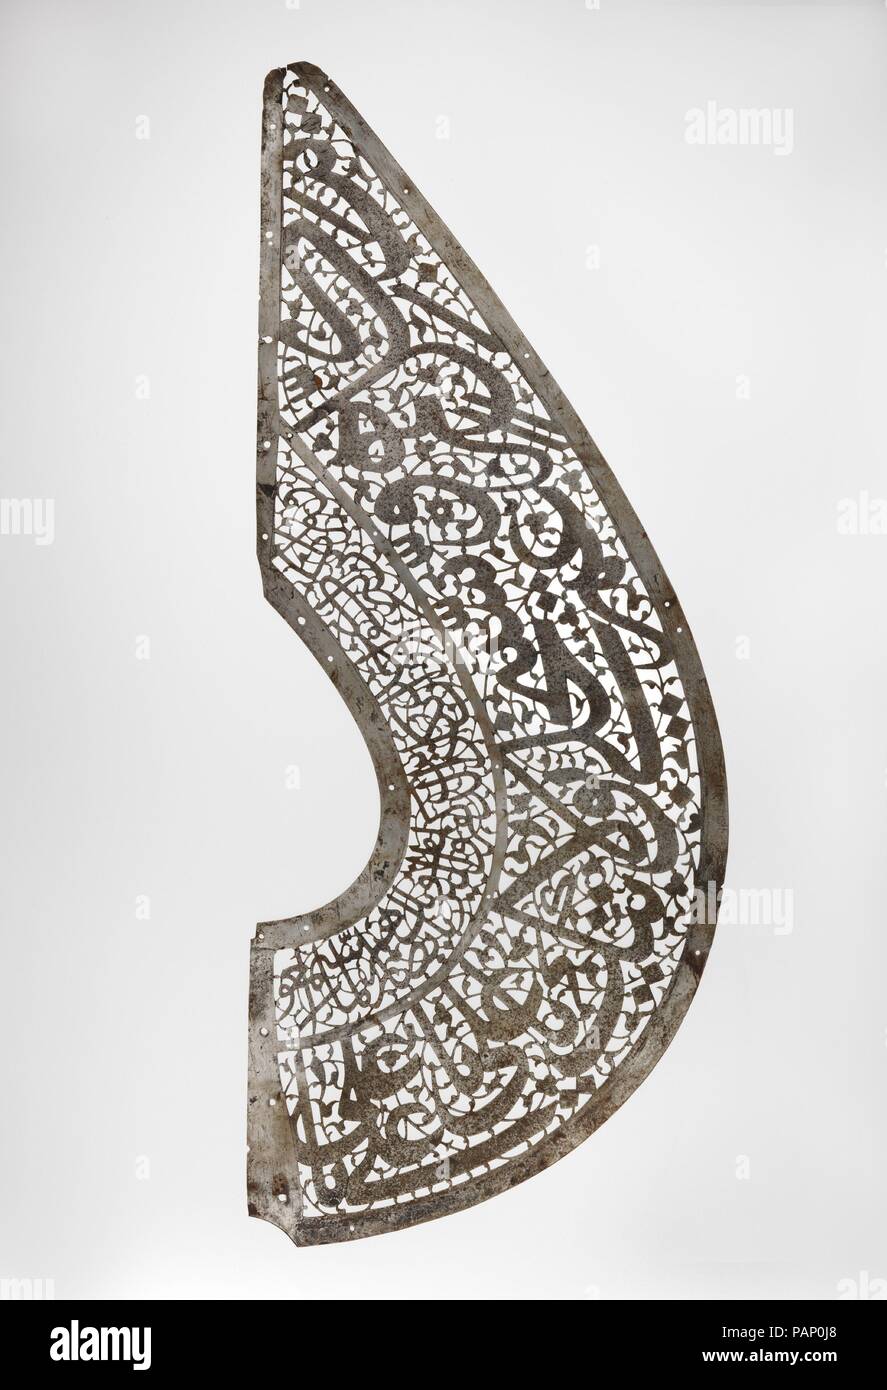 Fragment of a Standard ('alam). Dimensions: Gr. H. 9 1/2 in. (24.2 cm)  Gr. L. 23 3/4 in. (60.3 cm). Date: 17th century.  This fragment is the right half of a pear-shaped steel standard which would have been originally framed by a twisted steel cord ending in a pair of outward-facing dragon heads. The form echoes one of the many types depicted in battle paintings from the sixteenth century royal manuscript of the Shahnama of Shah Tahmasp. Standards from this period have pierced scrolling vegetal designs and talismanic inscriptions. Here, the inscriptions are Shi'i in tone and include the Nad-i Stock Photo